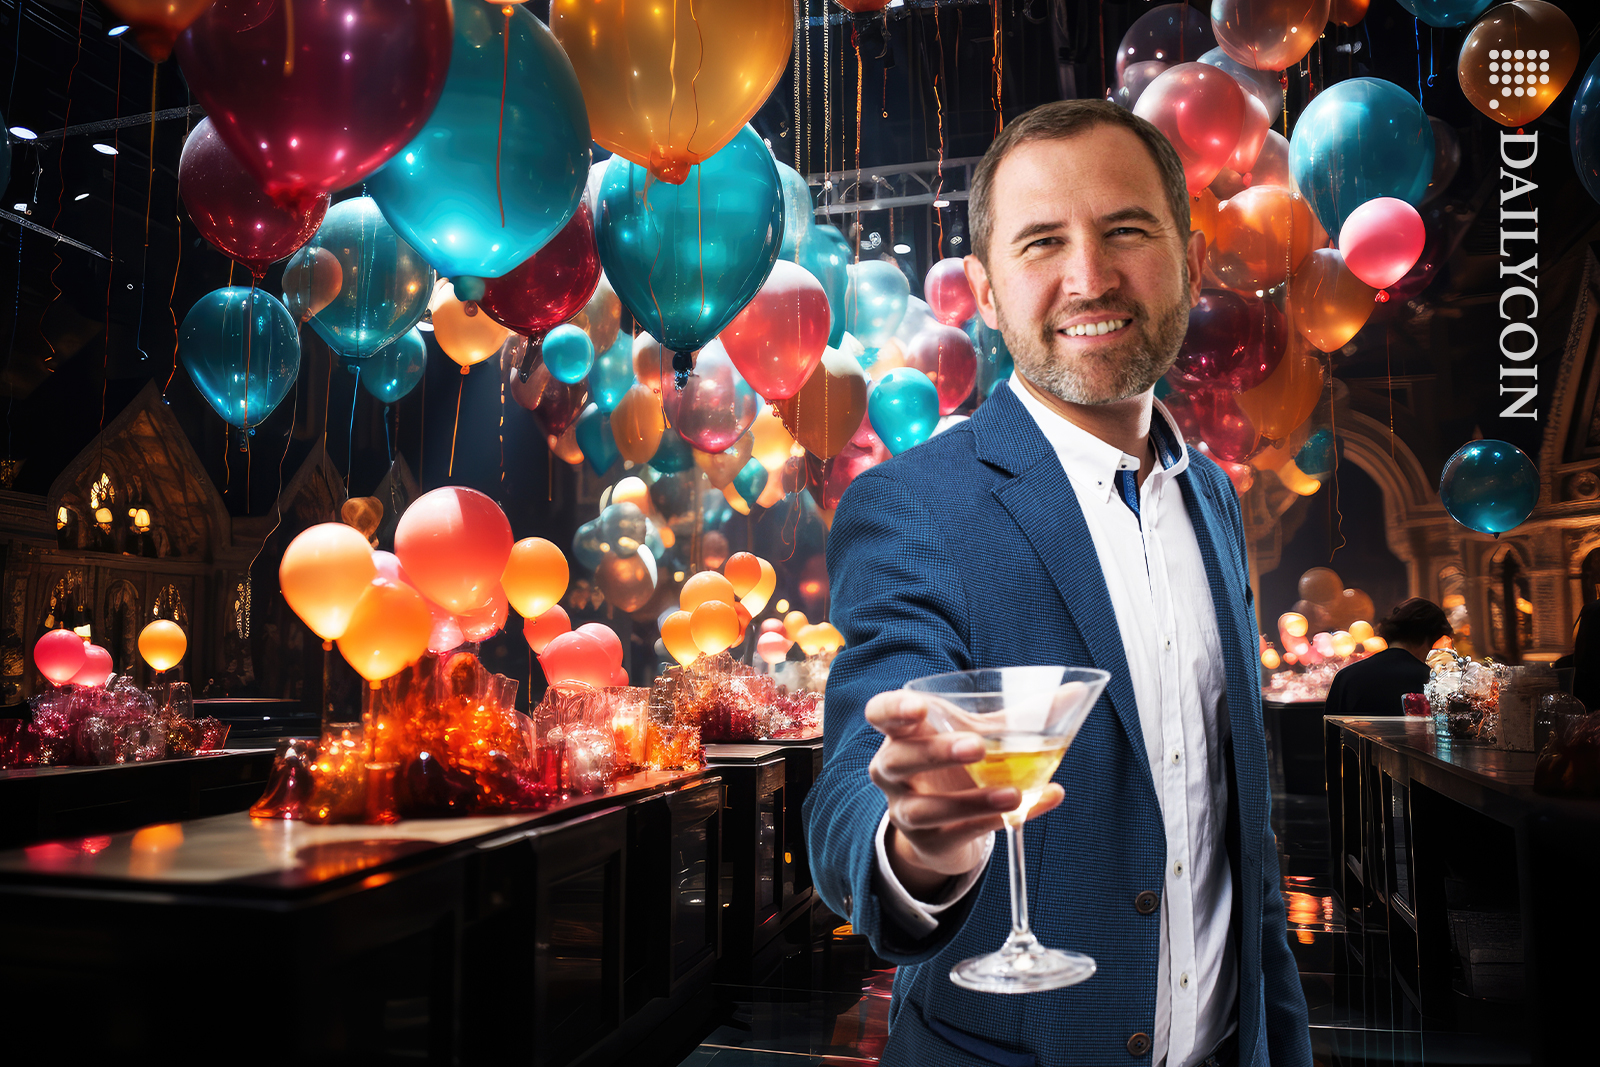 Brad Garlinghouse is asking you to join the party.